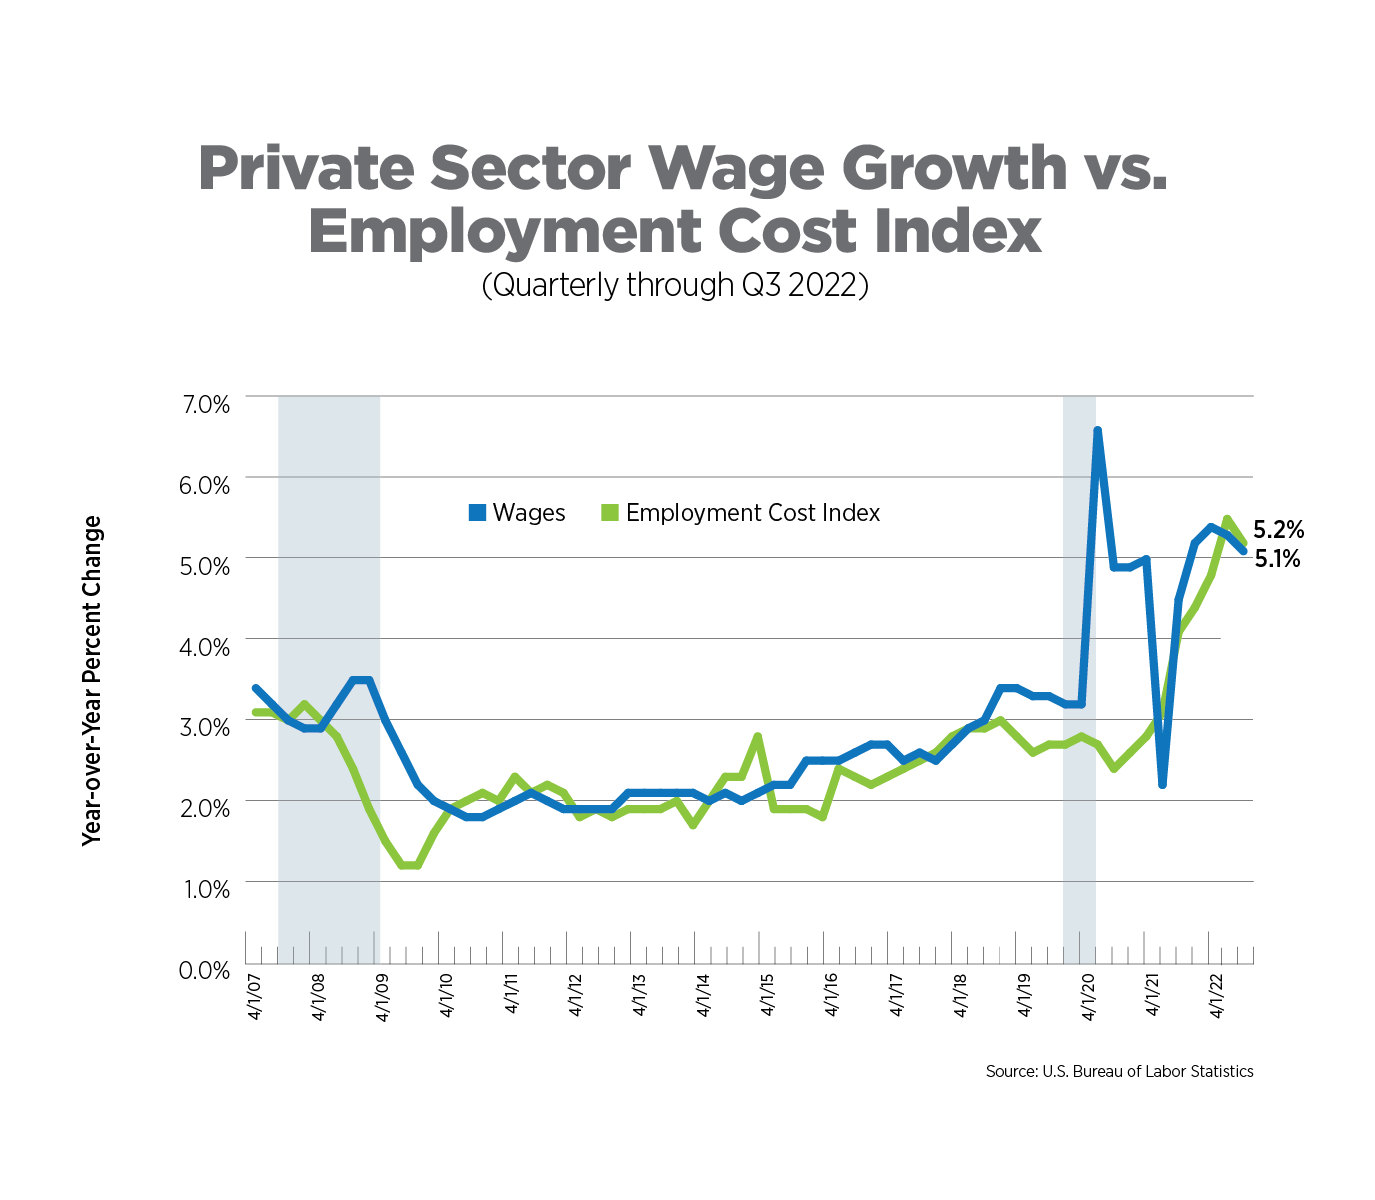 private sector wage growth vs employment cost index, quarterly through q3 2022